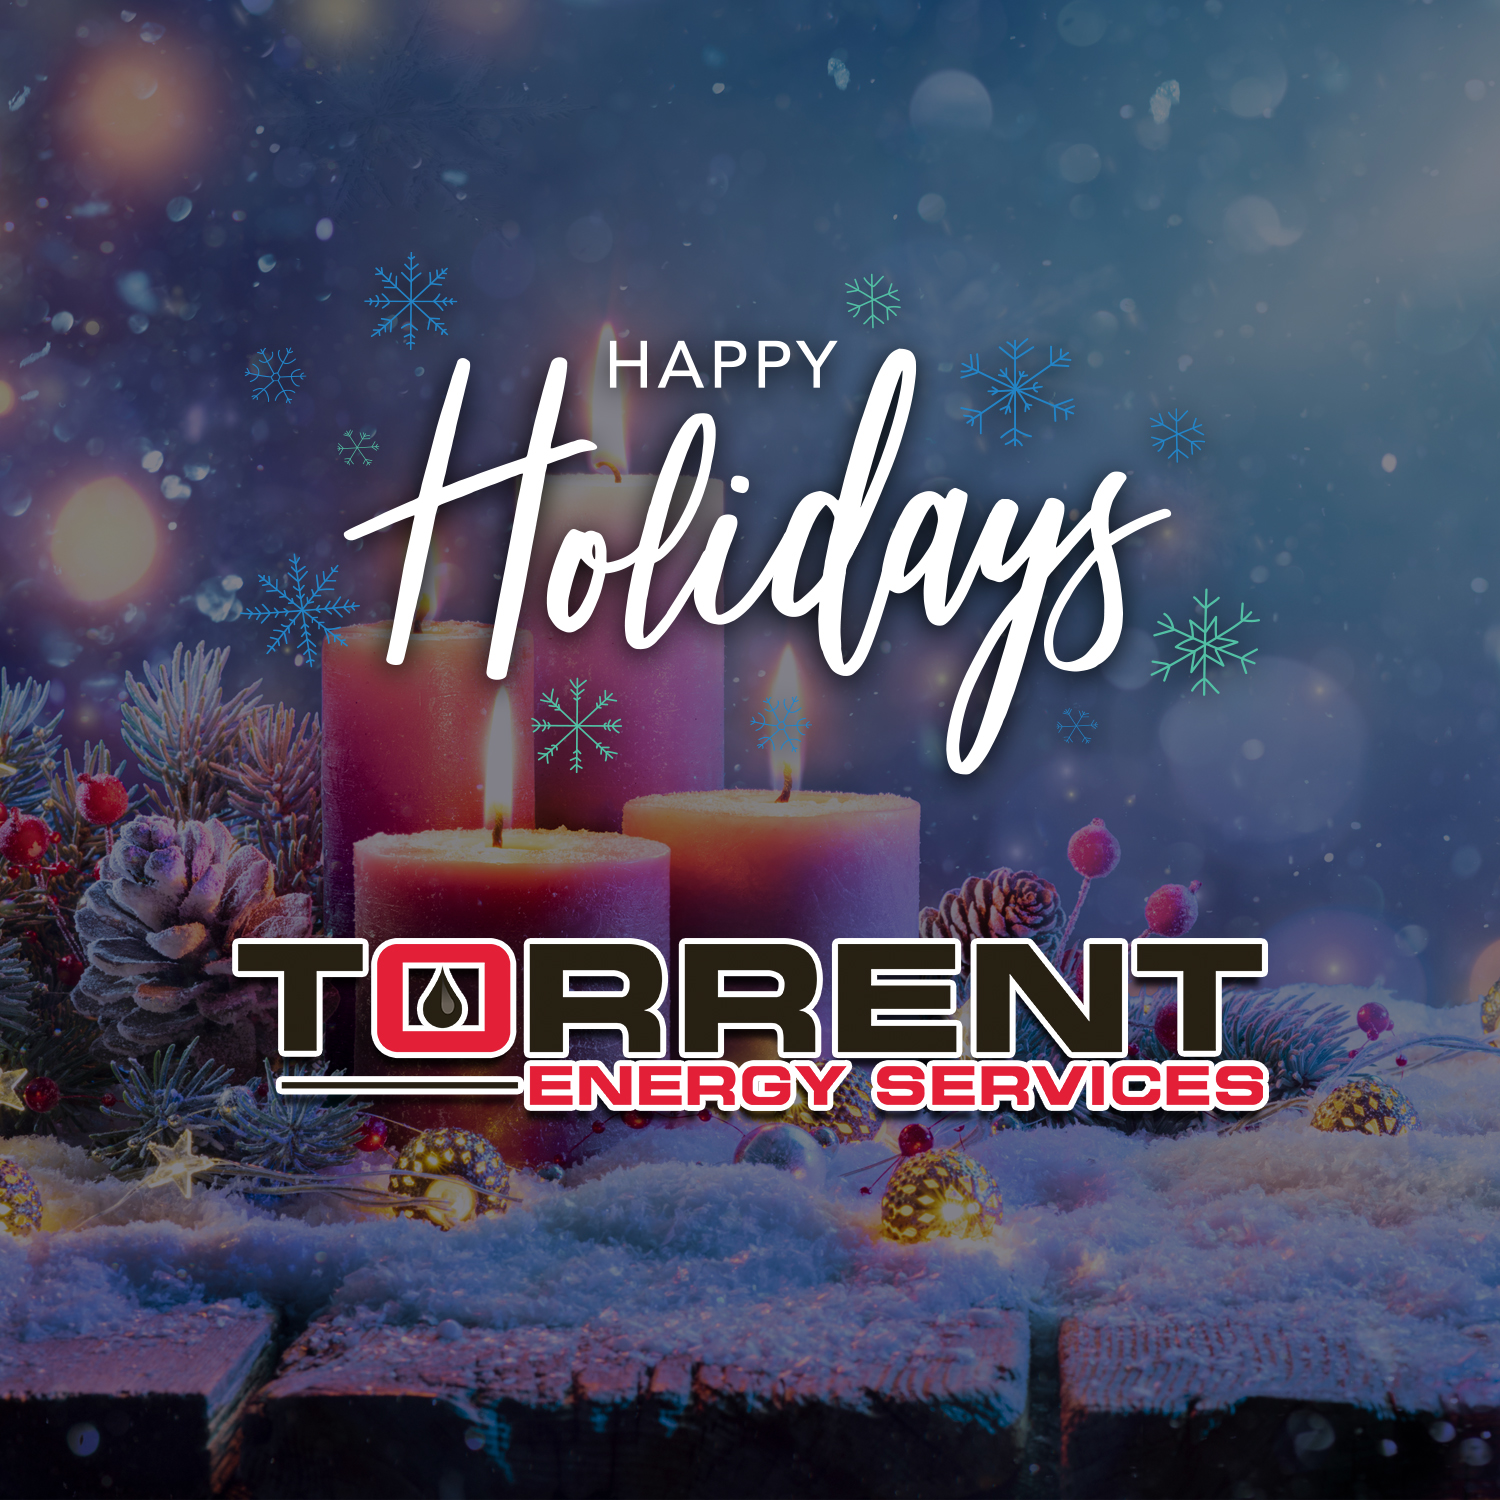 Happy Holidays from Torrent Energy Services